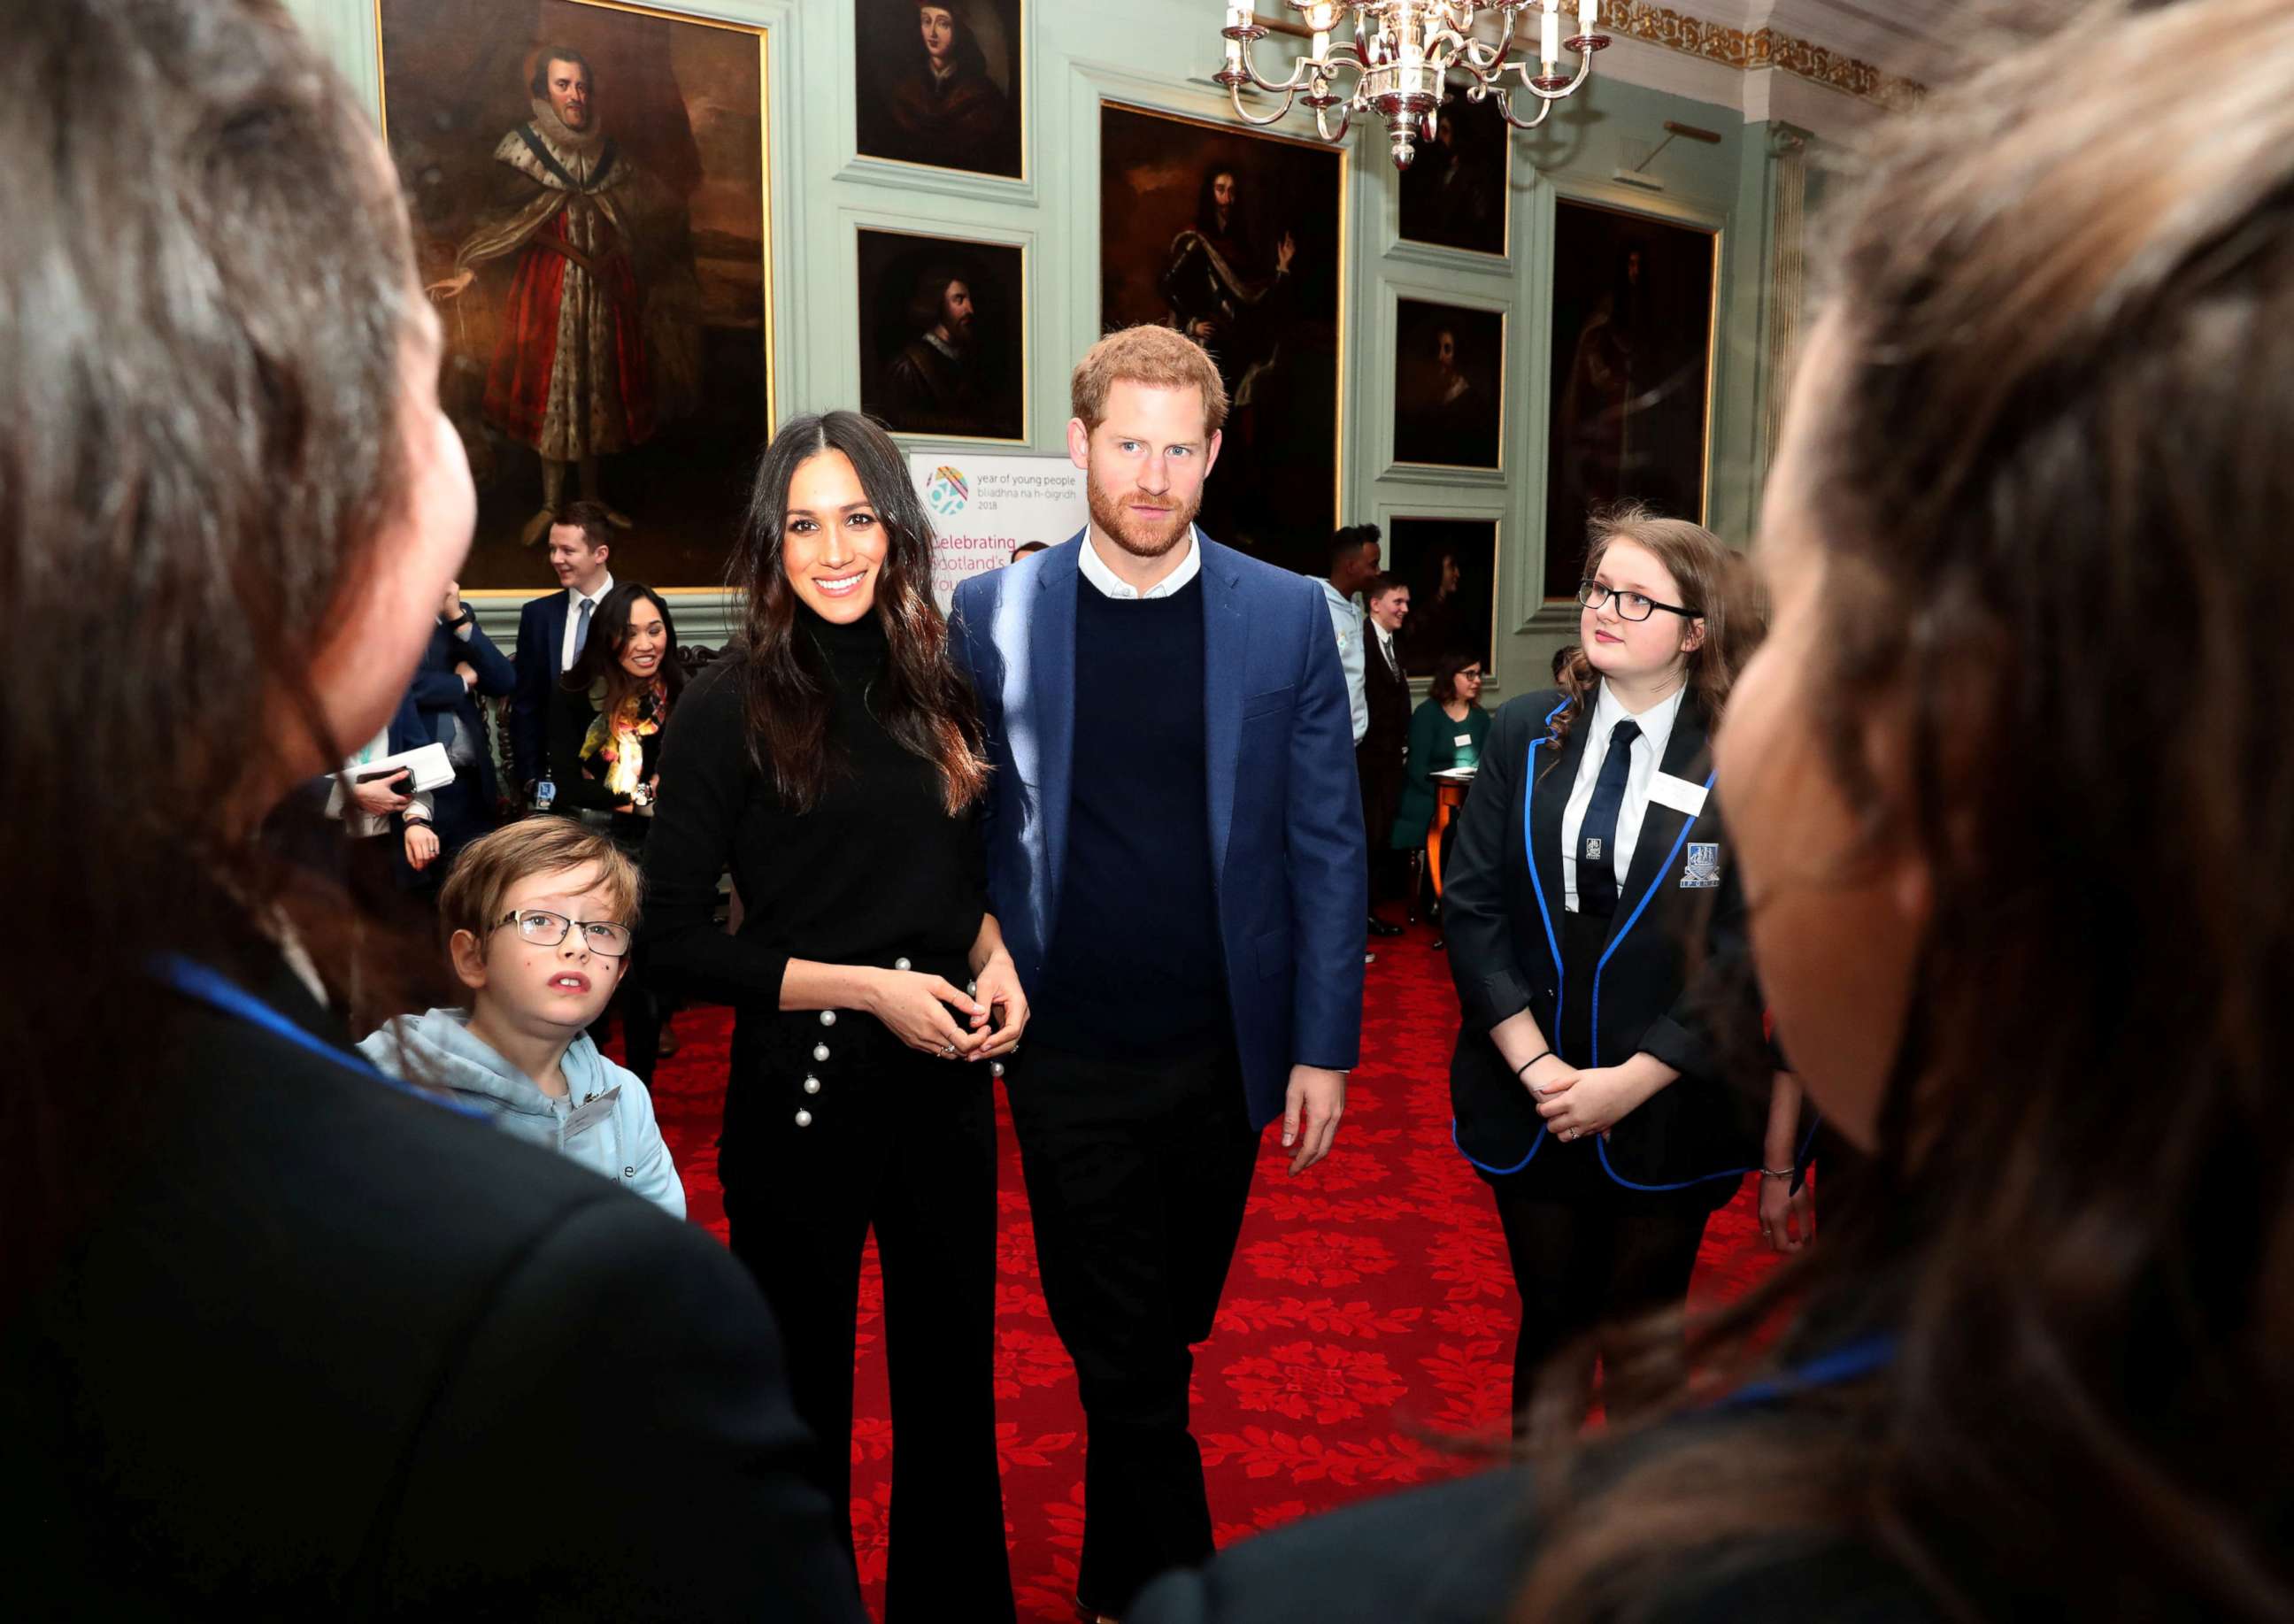 PHOTO: Britain's Prince Harry and his fiancee Meghan Markle attend a reception for young people at the Palace of Holyroodhouse, in Edinburgh, Britain, Feb. 13, 2018.